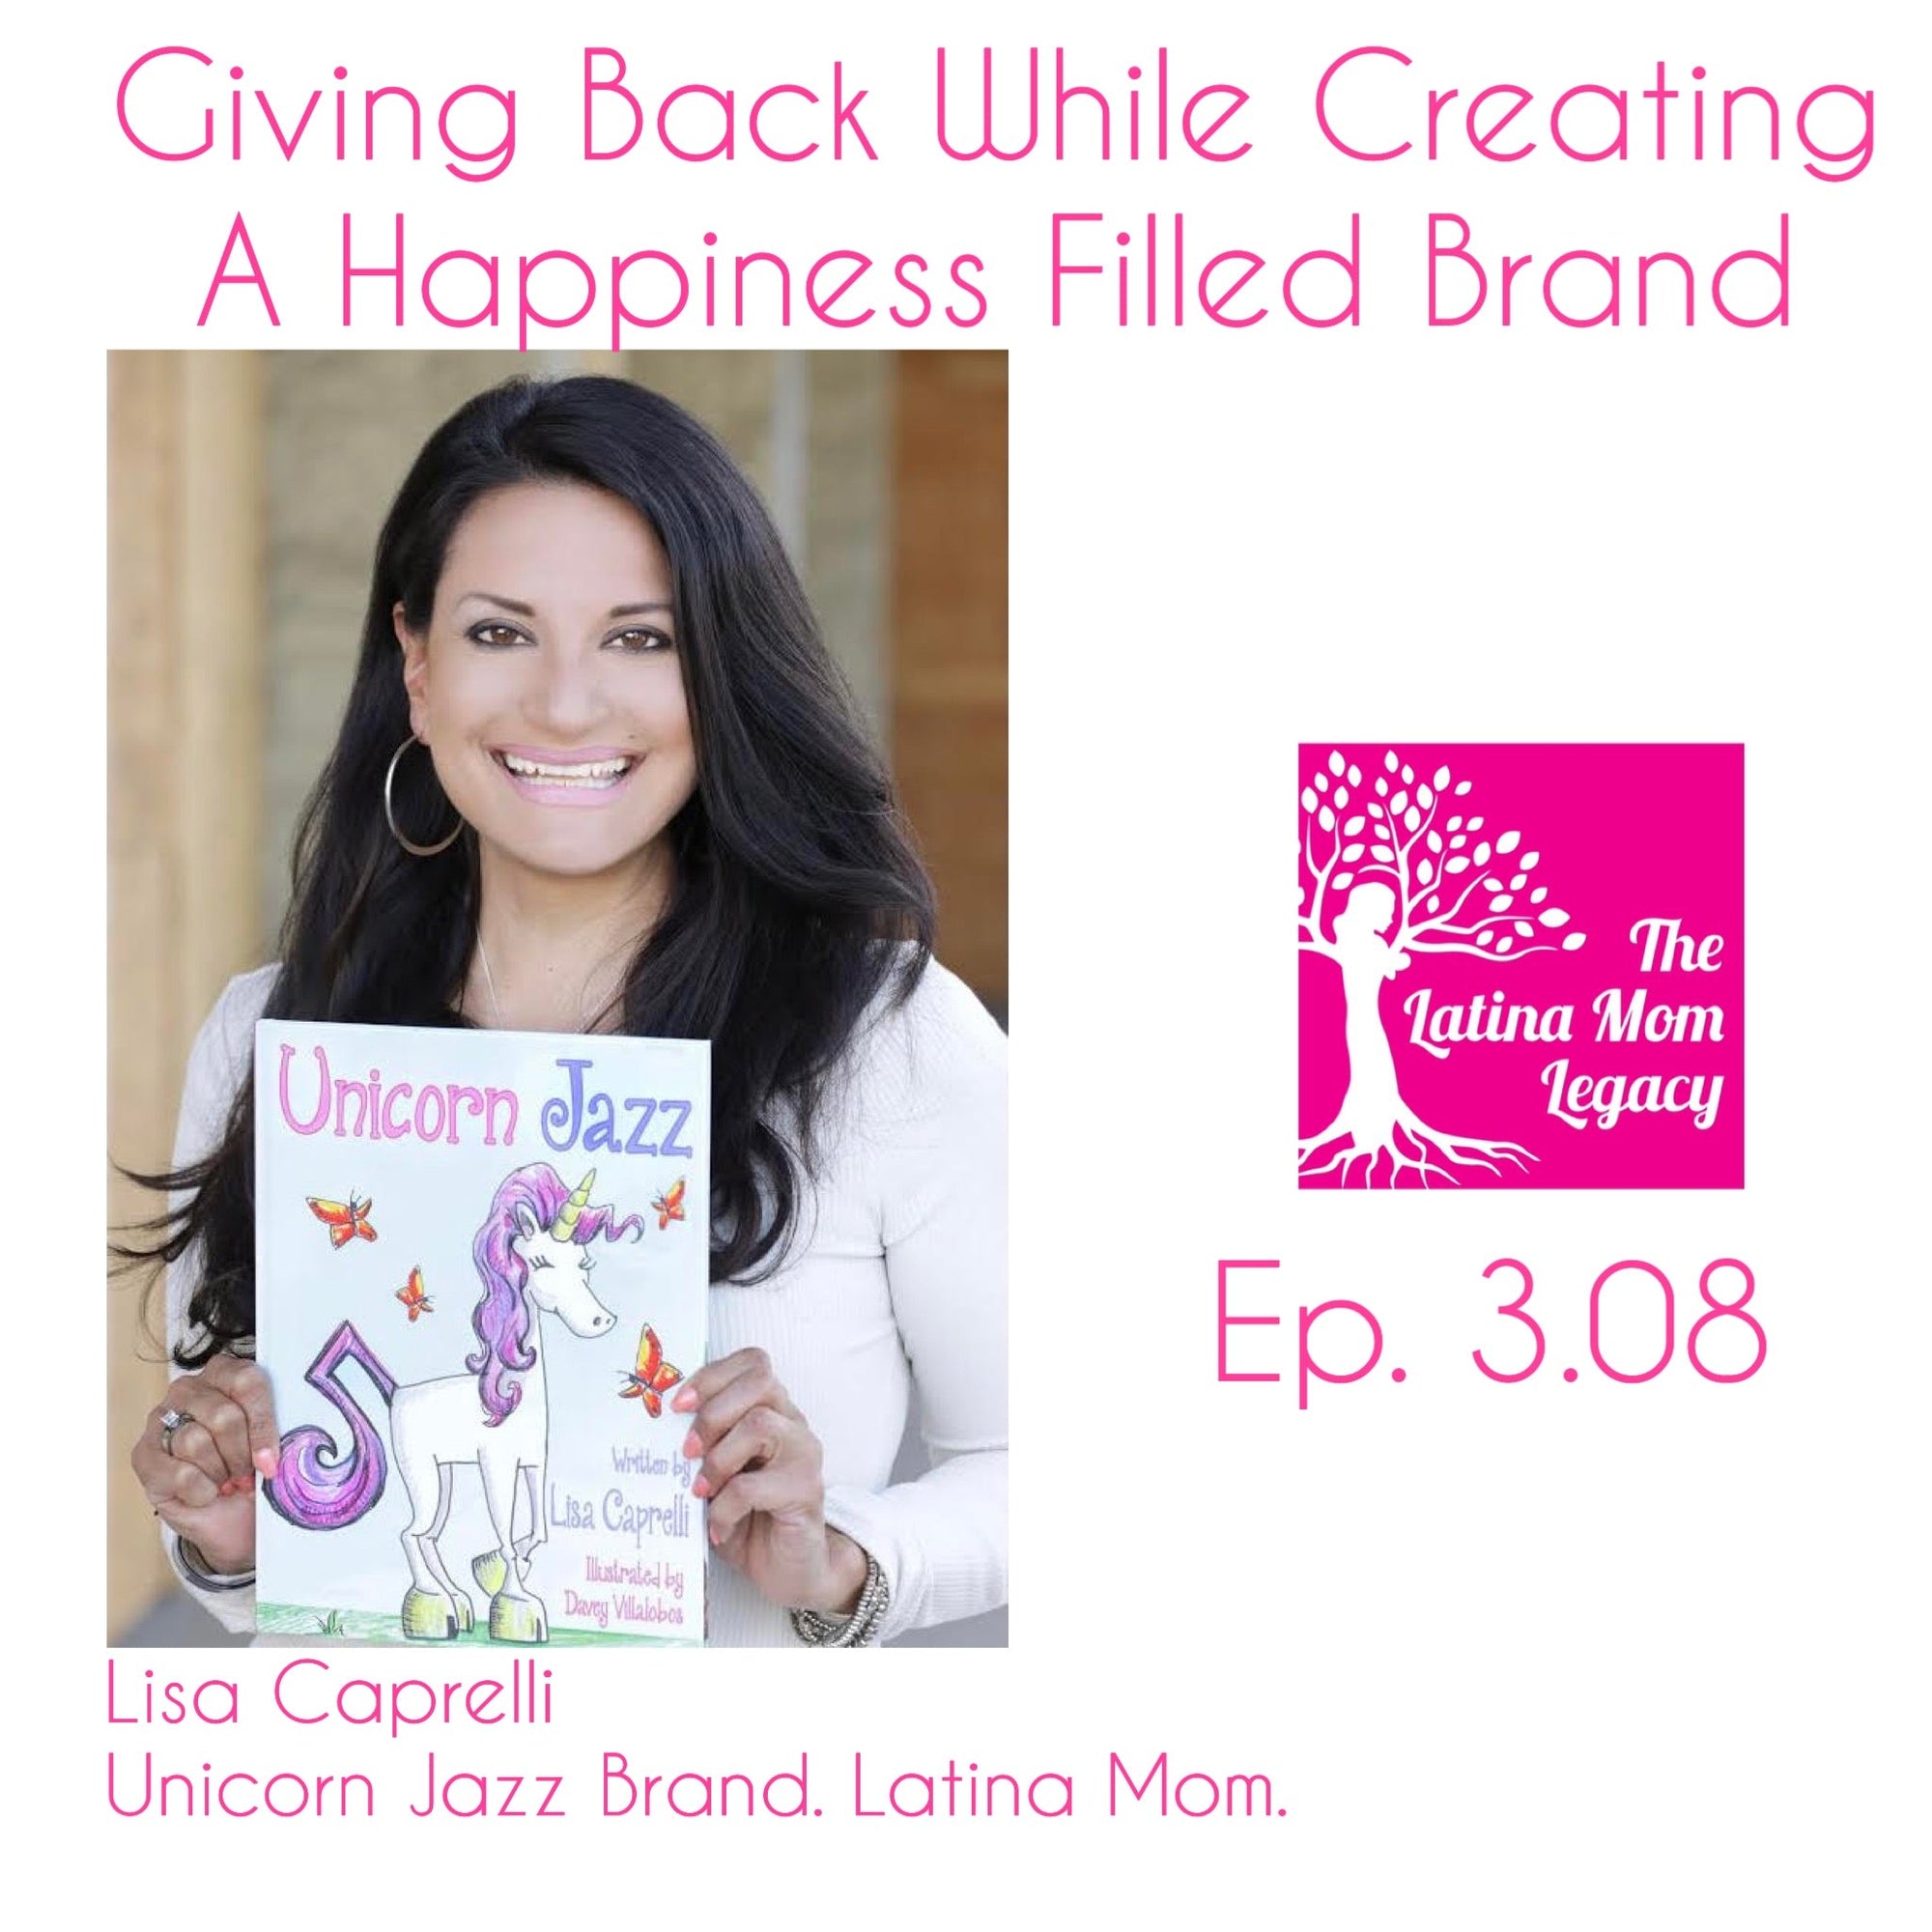 3.08 Lisa Caprelli - Giving Back While Creating Happiness Filled Children's Books and Brand Unicorn Jazz - Mi LegaSi